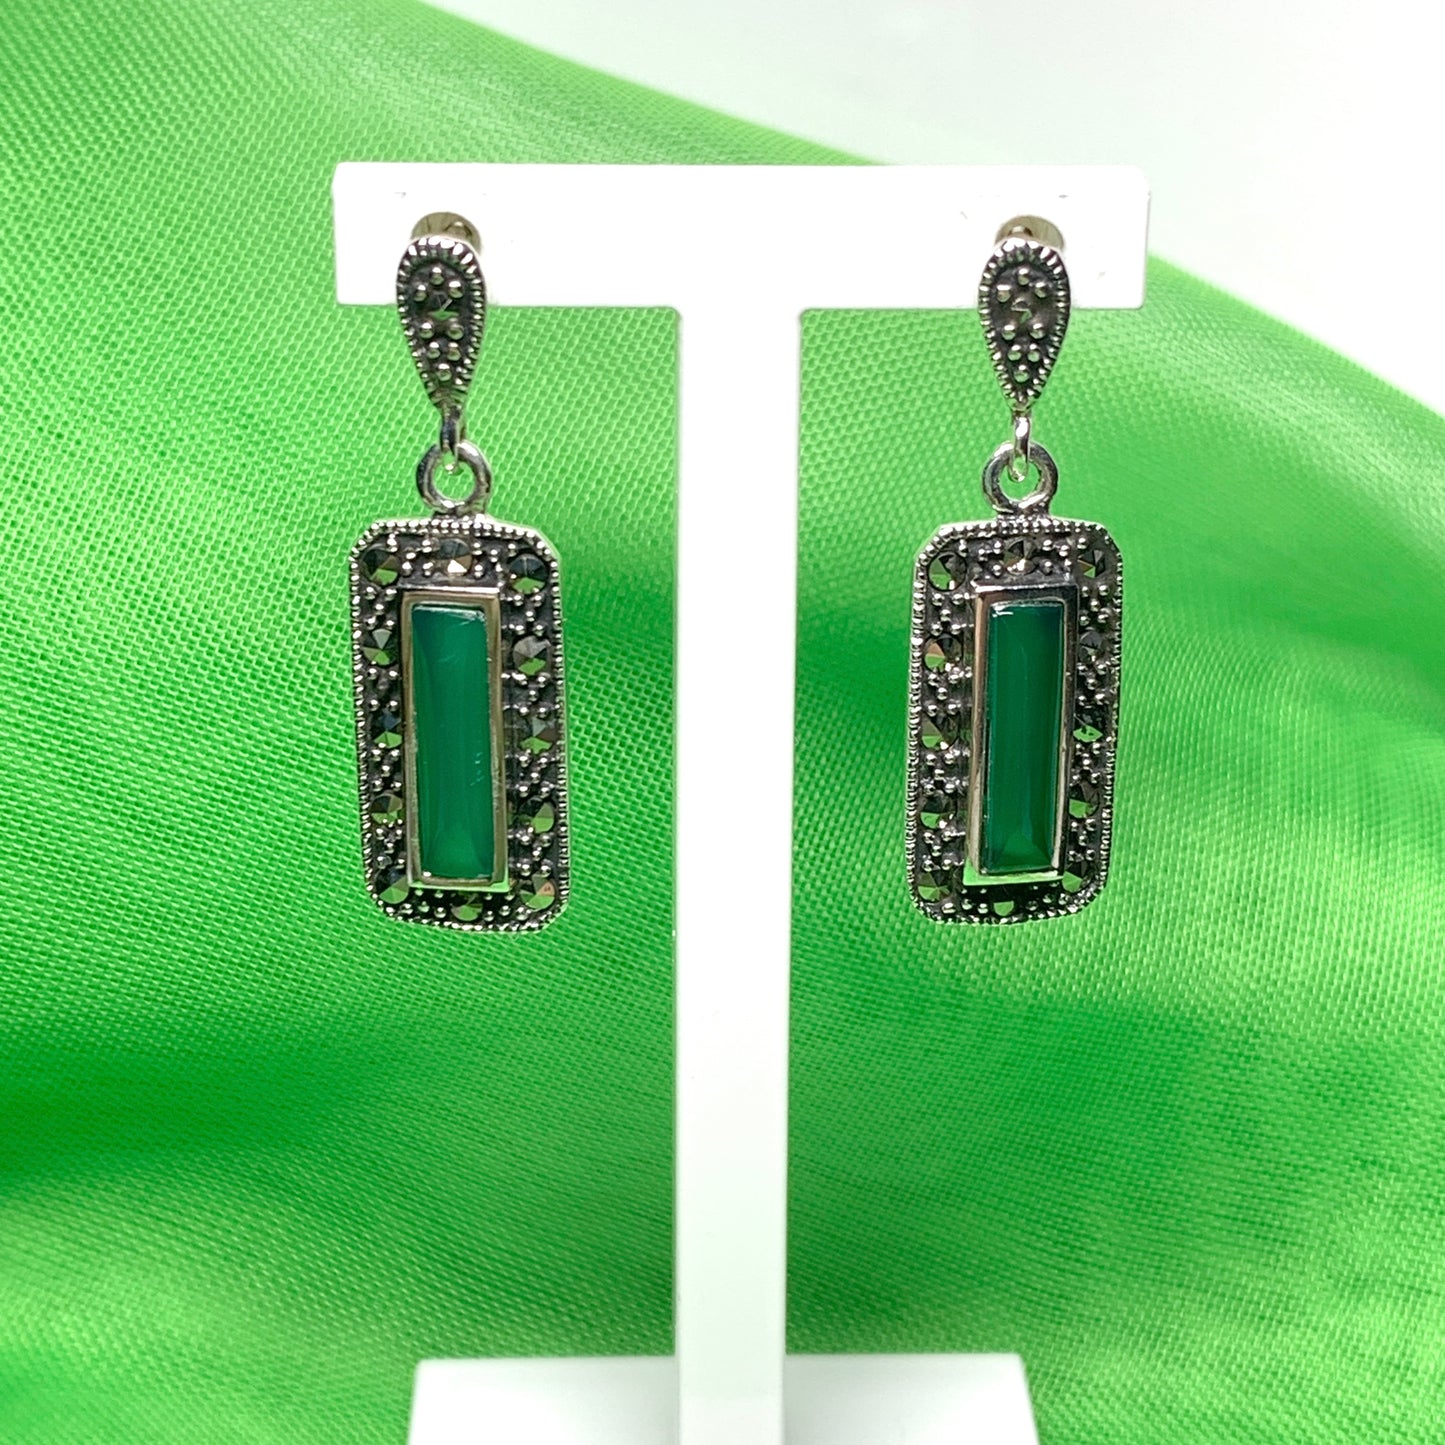 Real green agate and marcasite drop earrings sterling silver